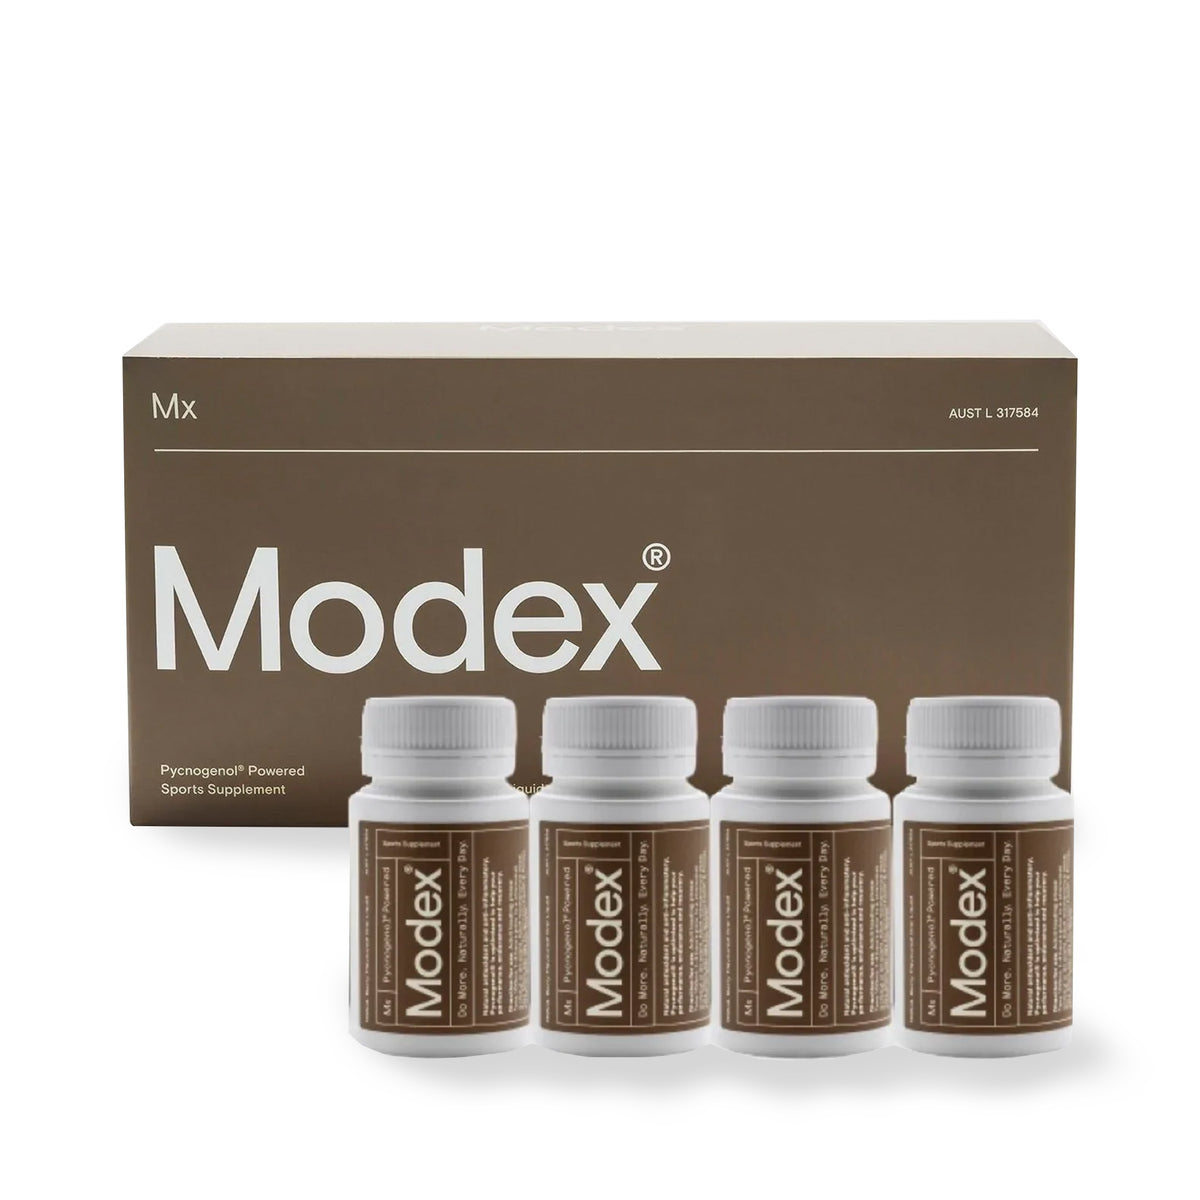 Modex Daily Performance Nutrition